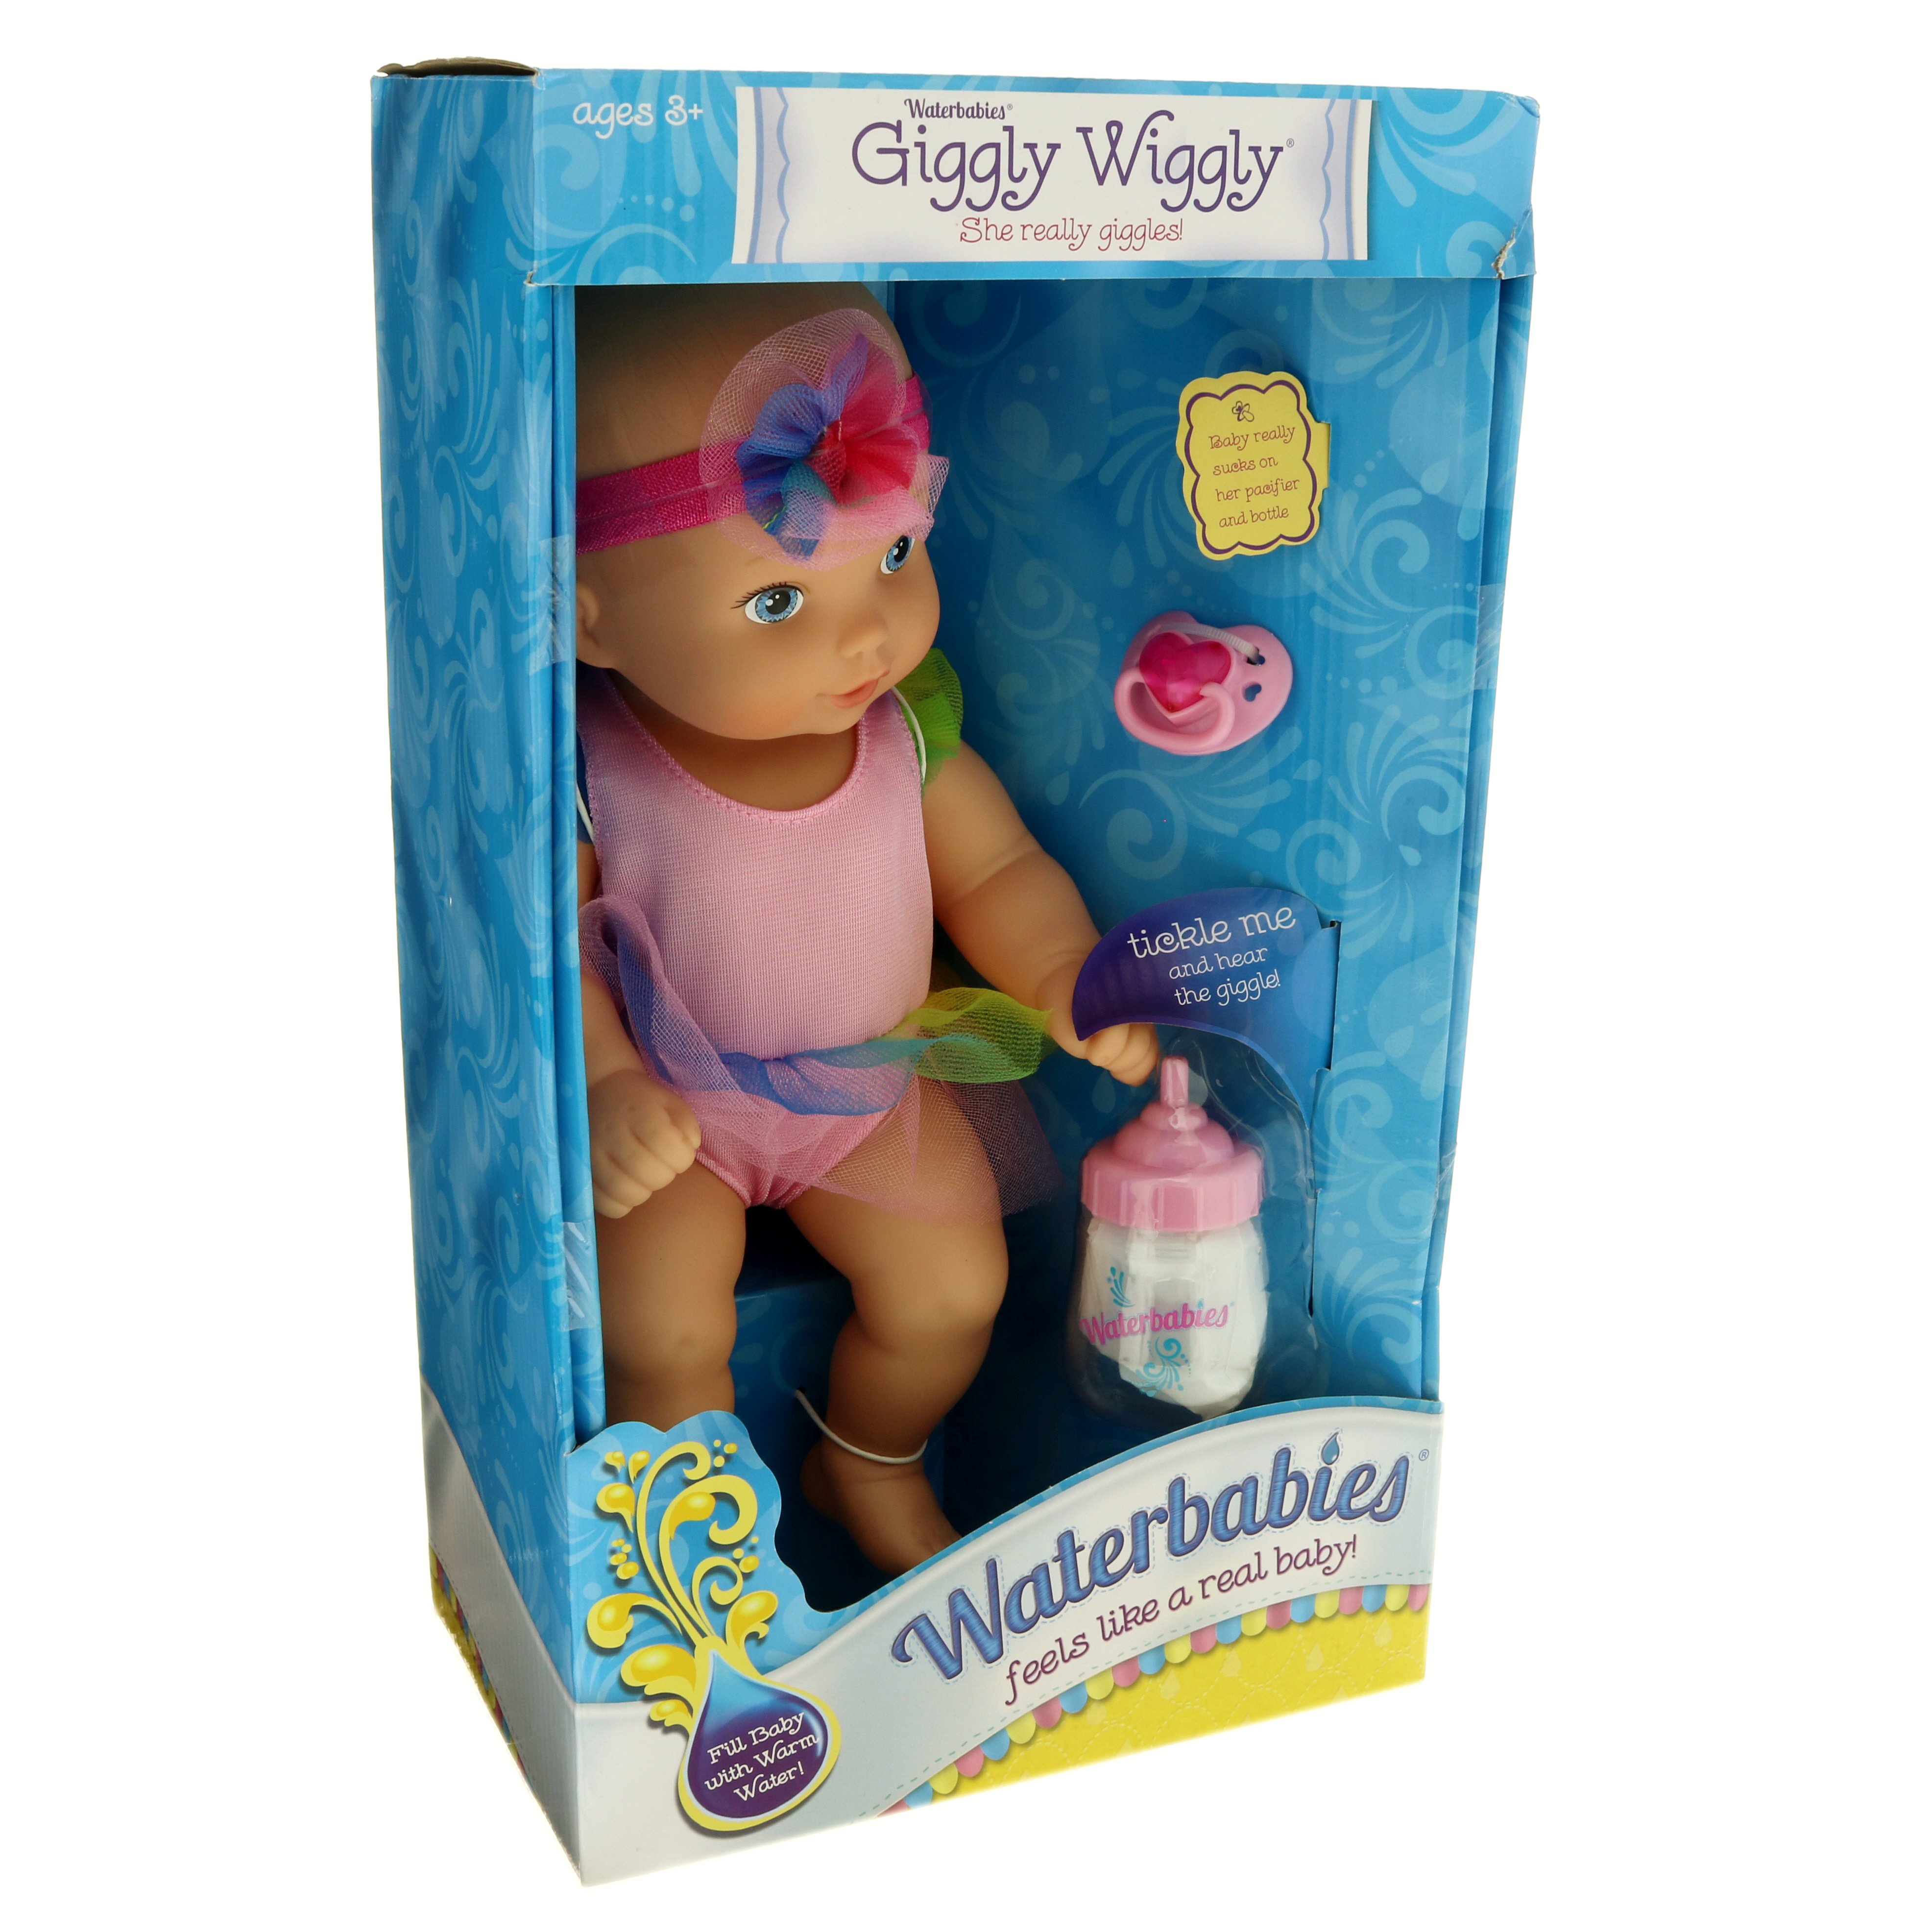 water babies giggly wiggly doll